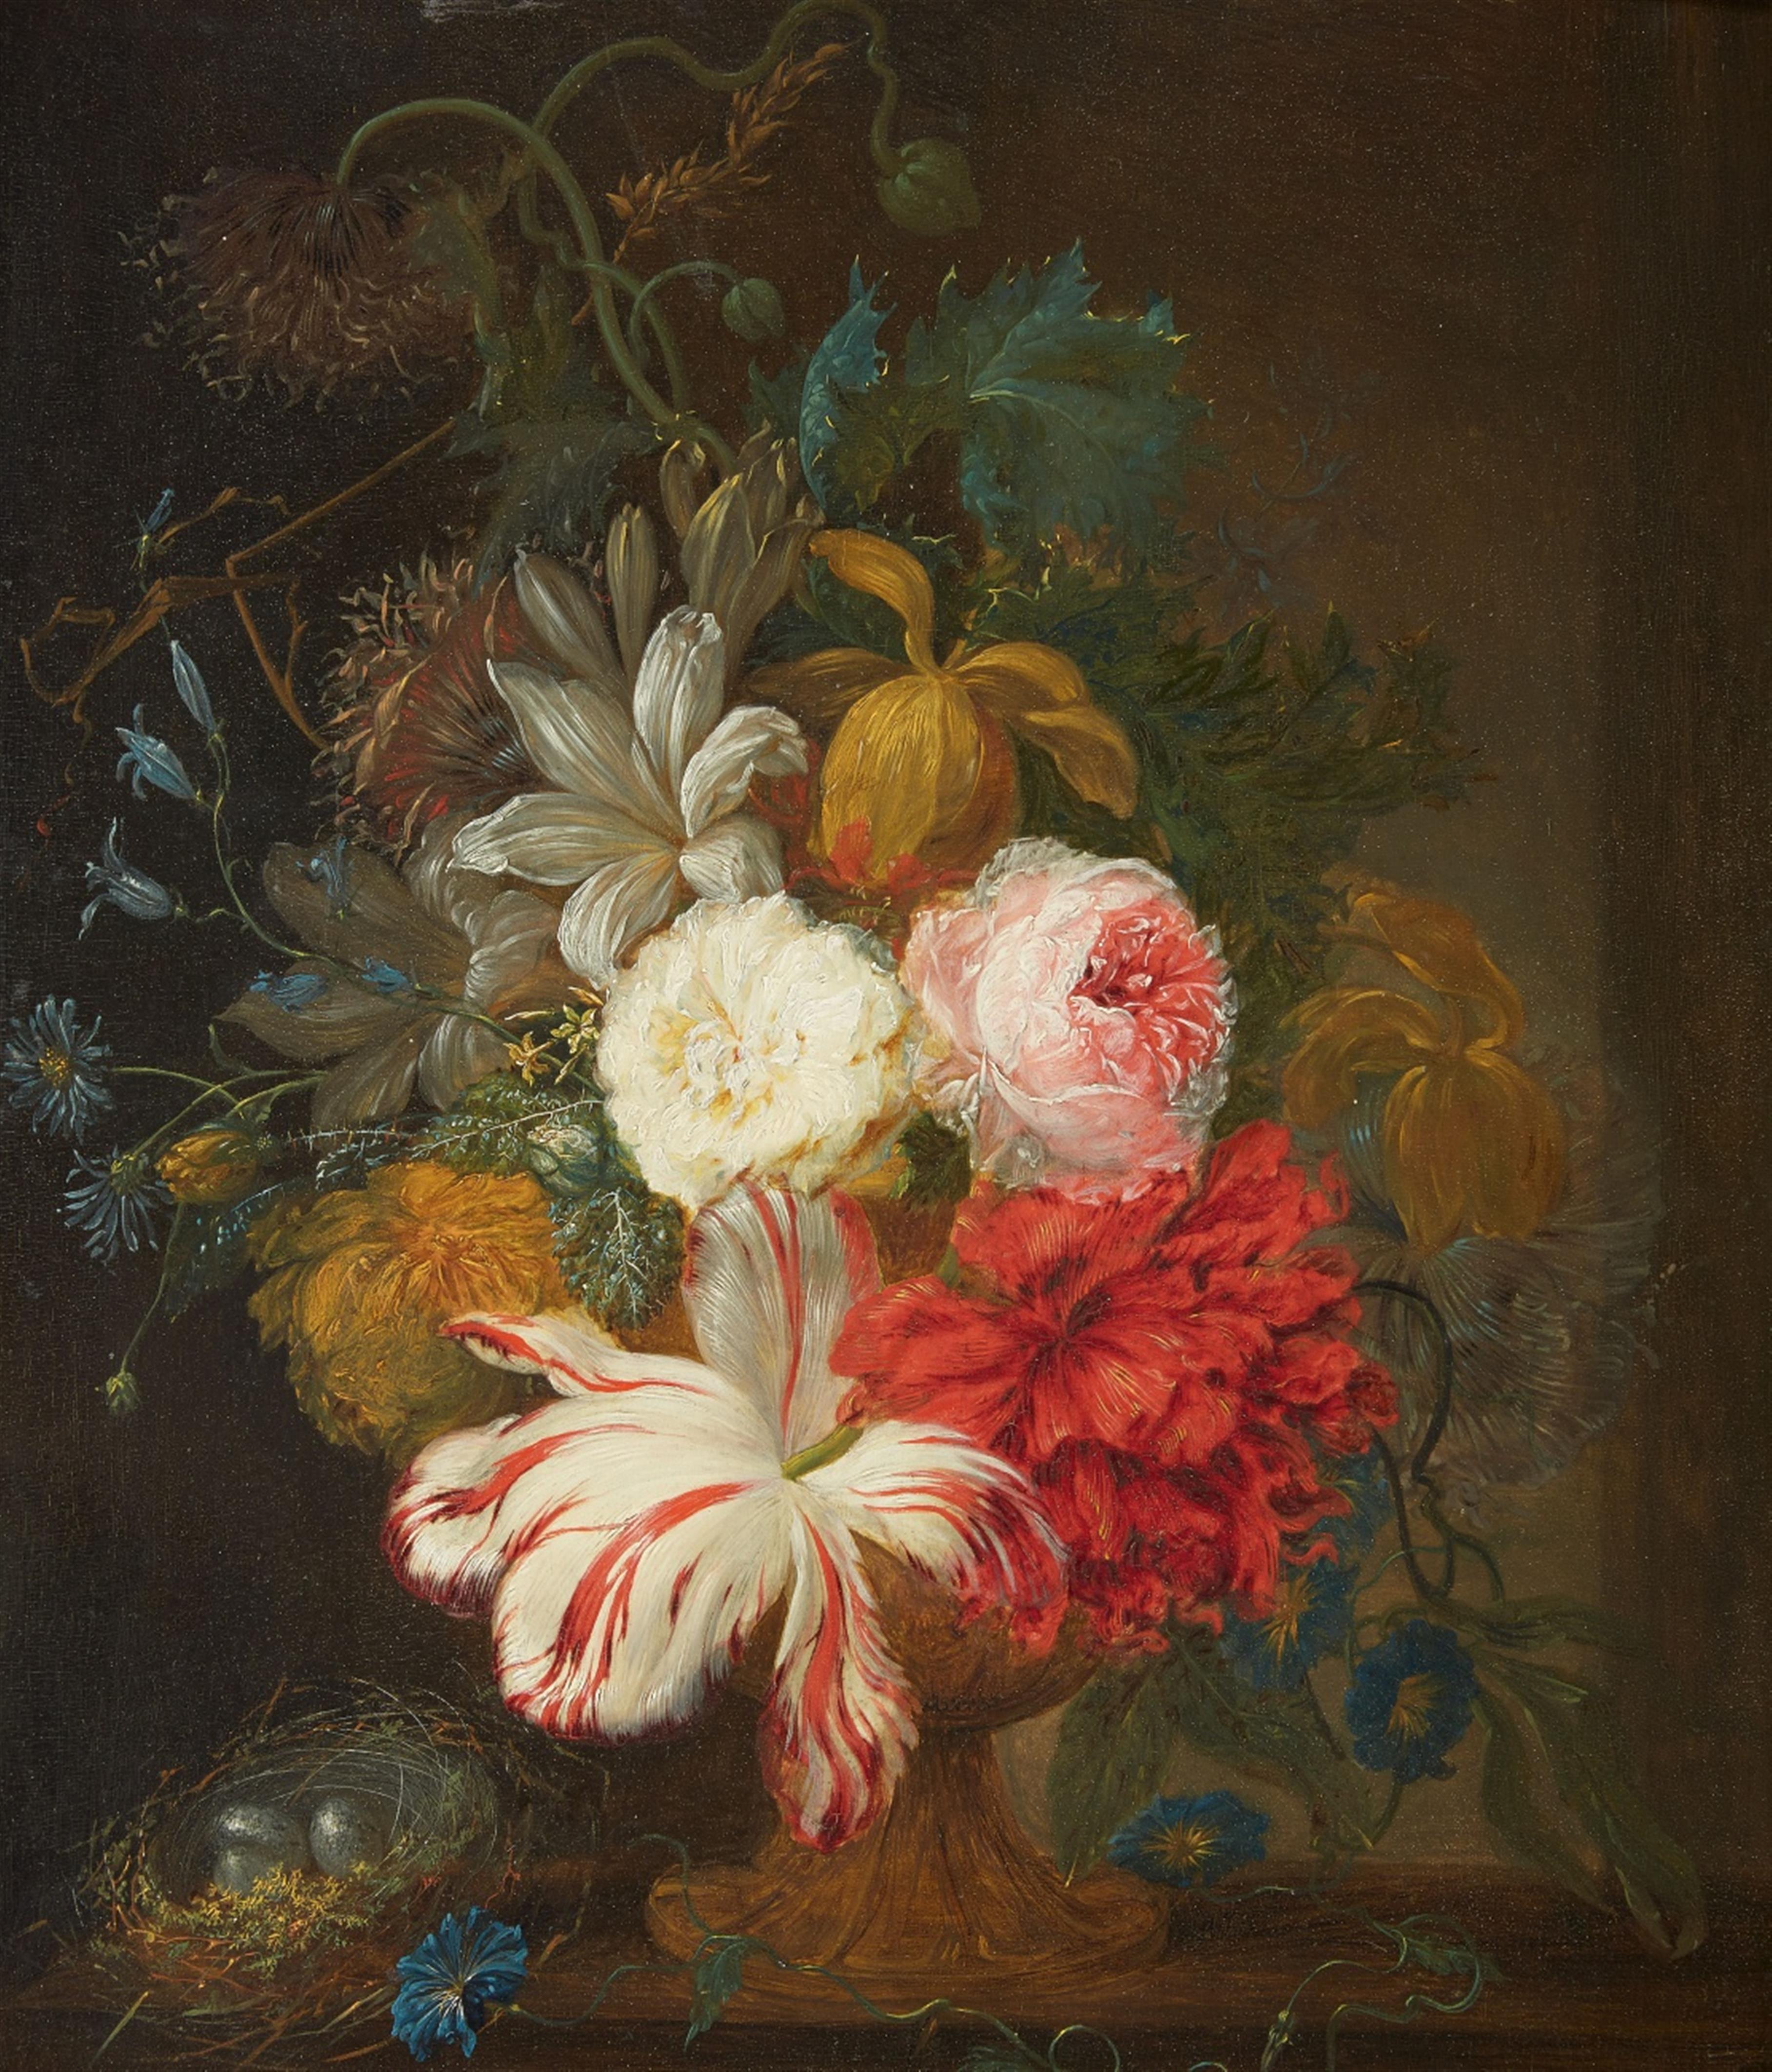 Netherlandish School circa 1700 - Still Life with a Vase of Flowers and a Bird's Nest - image-1